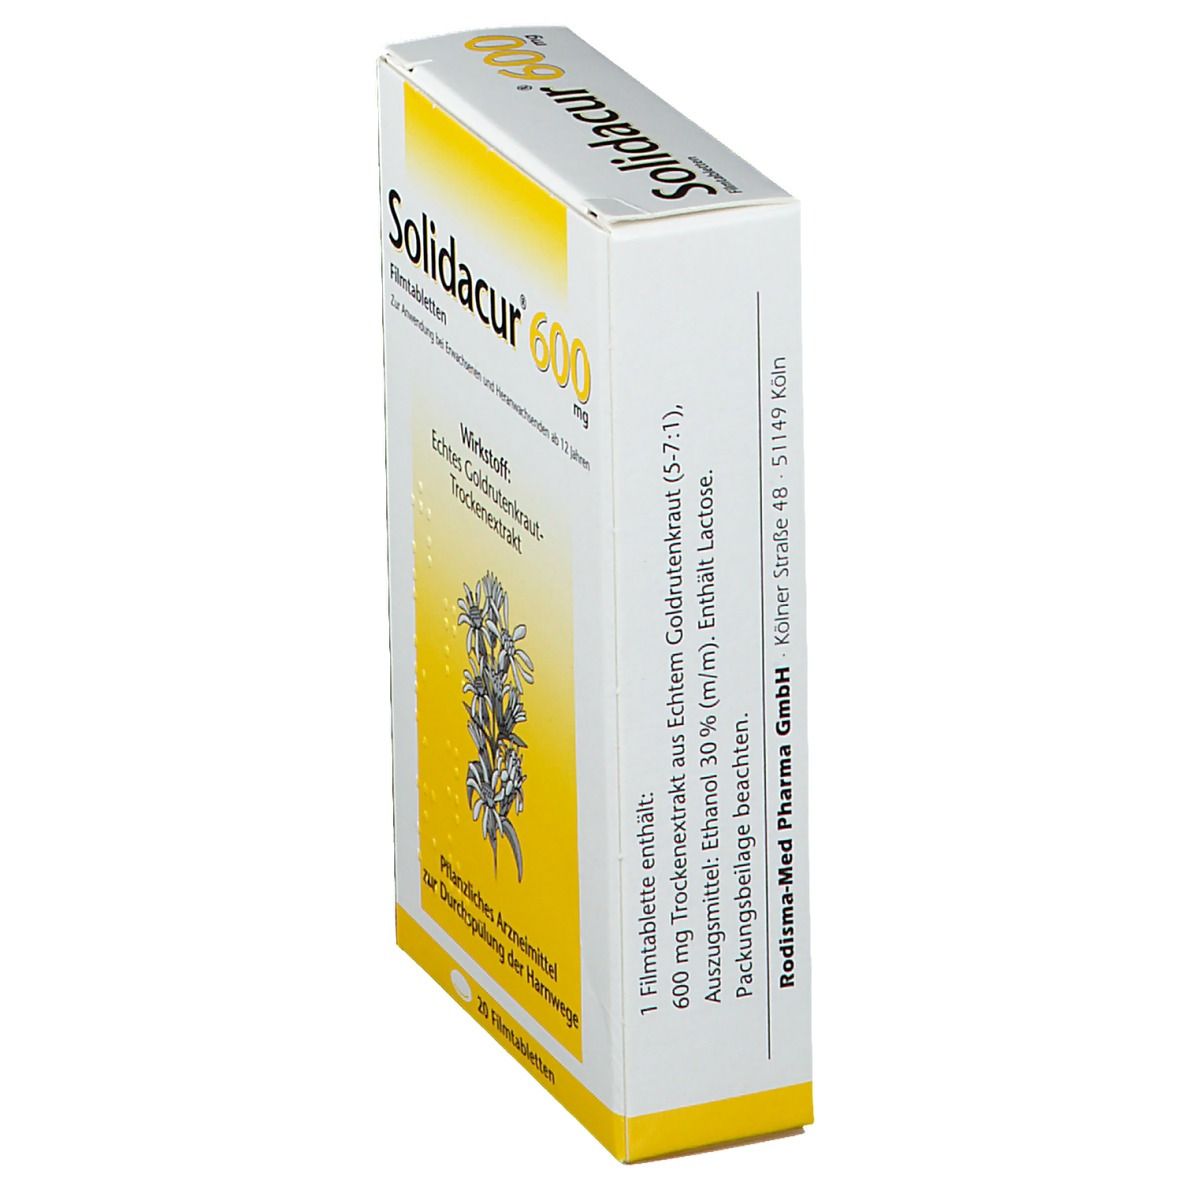 Solidacur® 600 mg